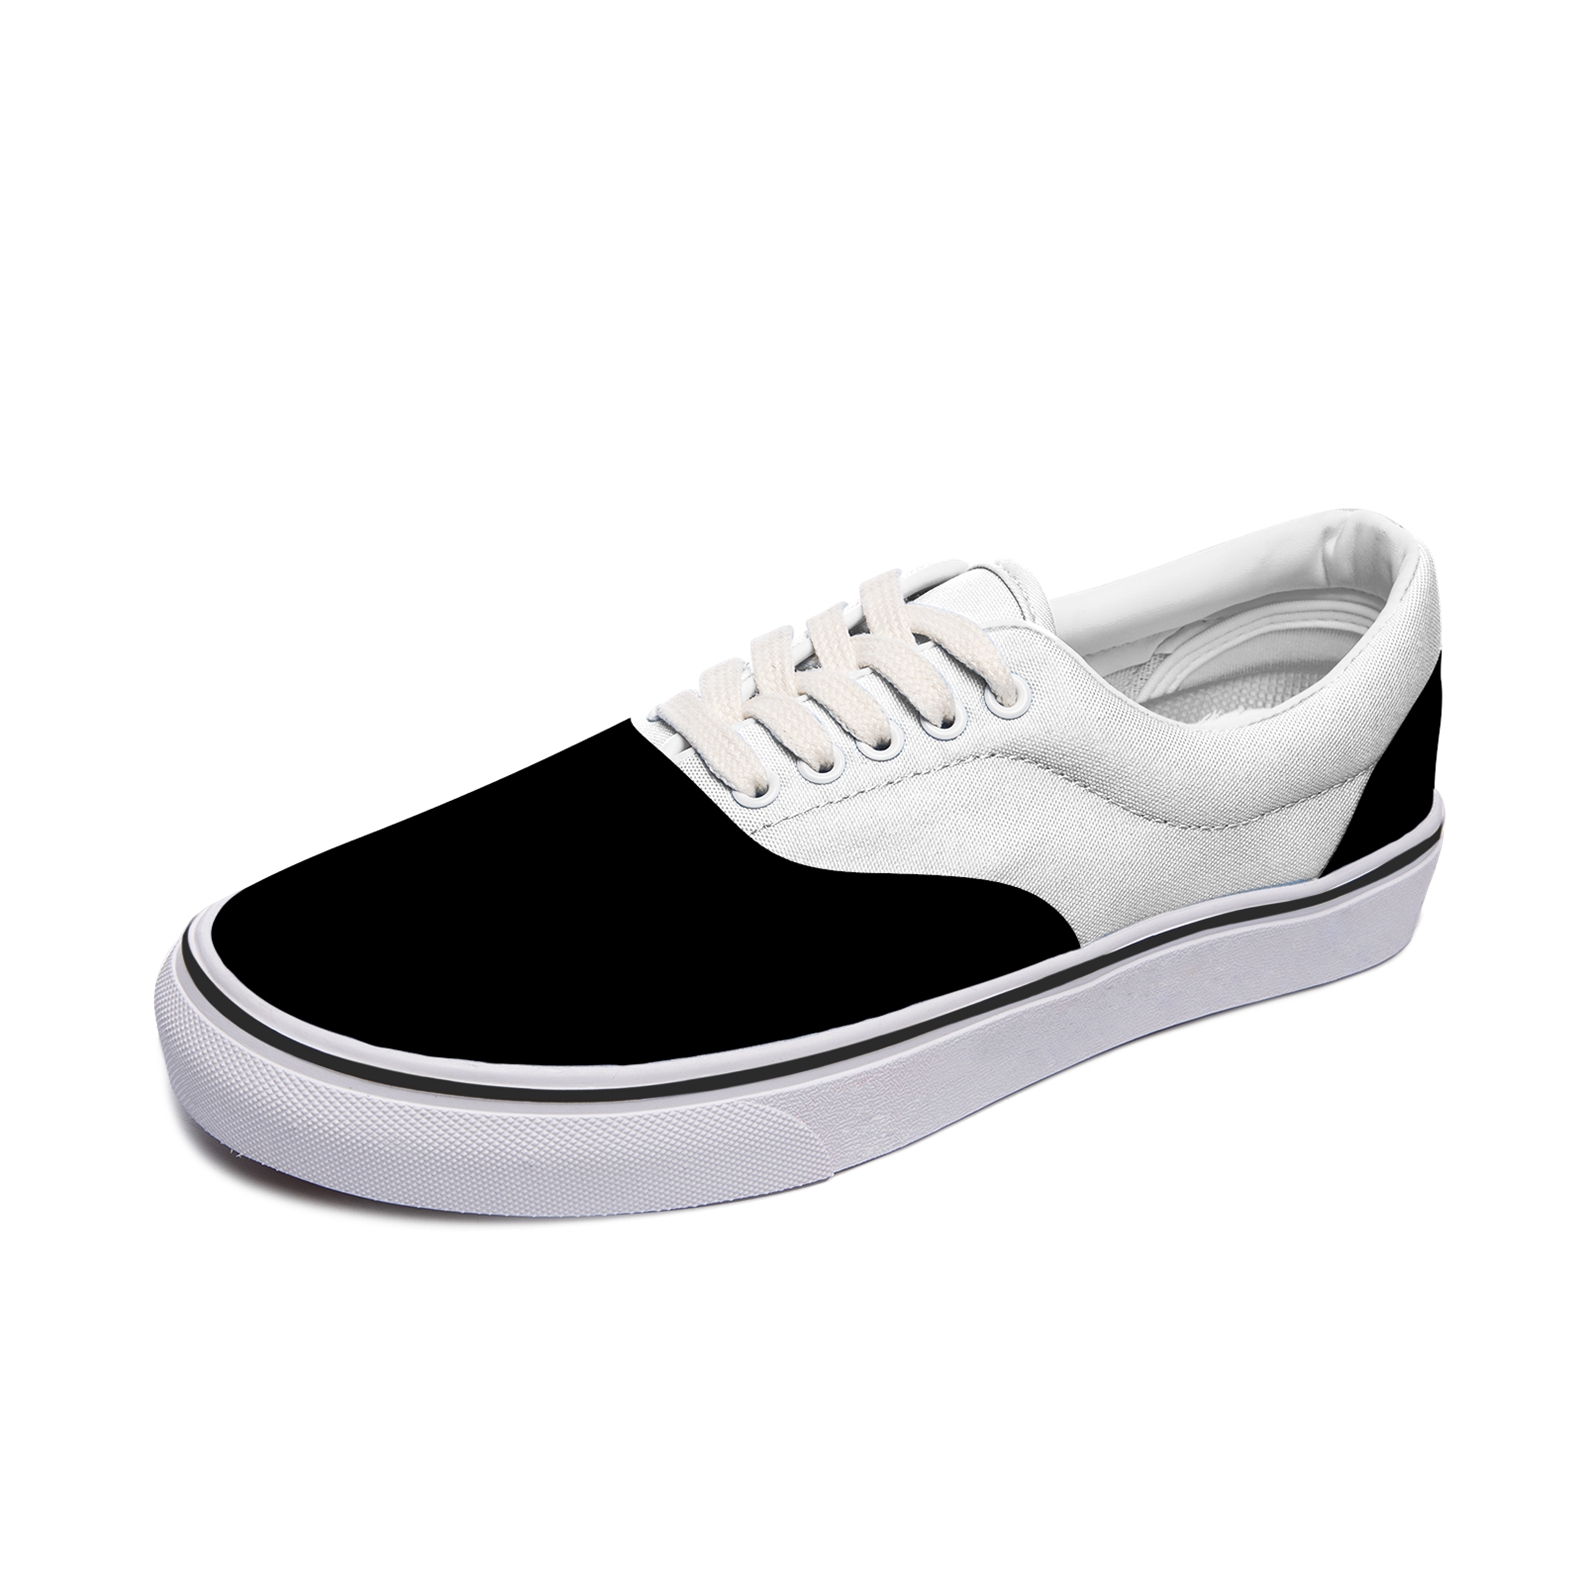 Men's fashion color block canvas sneakers low-top casual walking shoes classic comfortable flat fashion sneakers